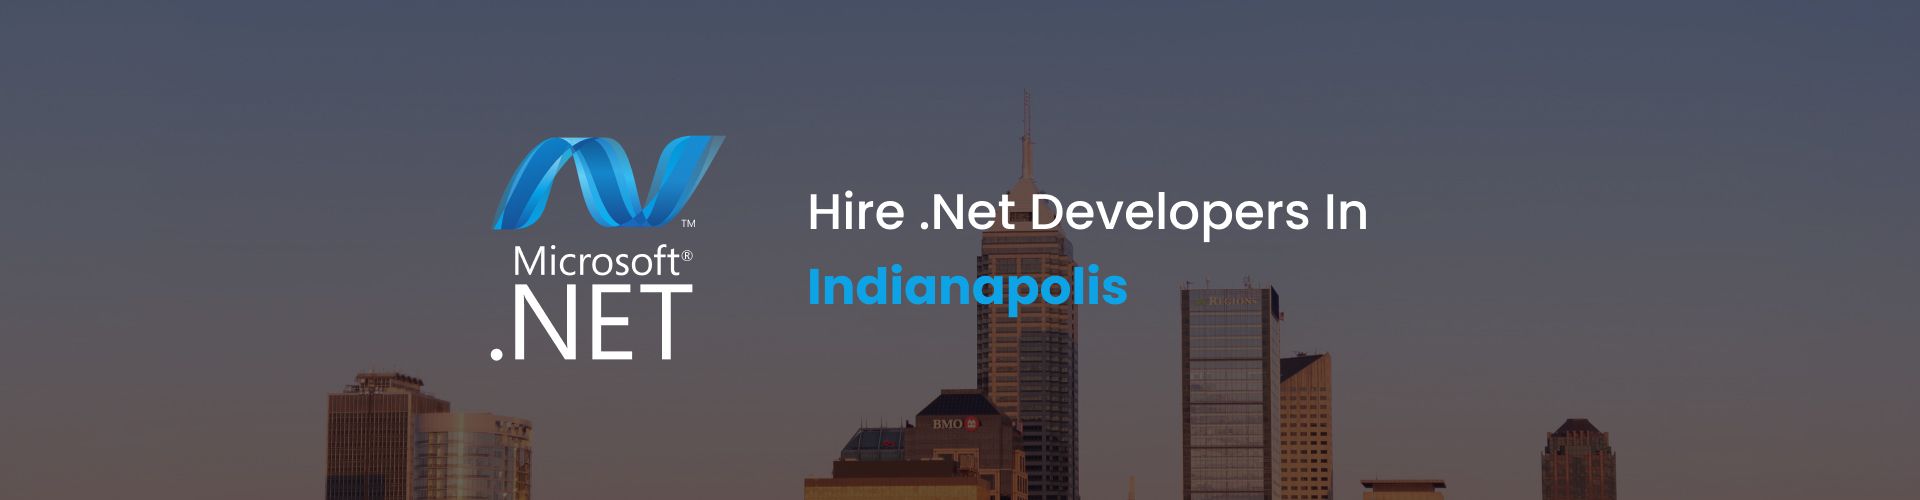 hire .net developers in indianapolis